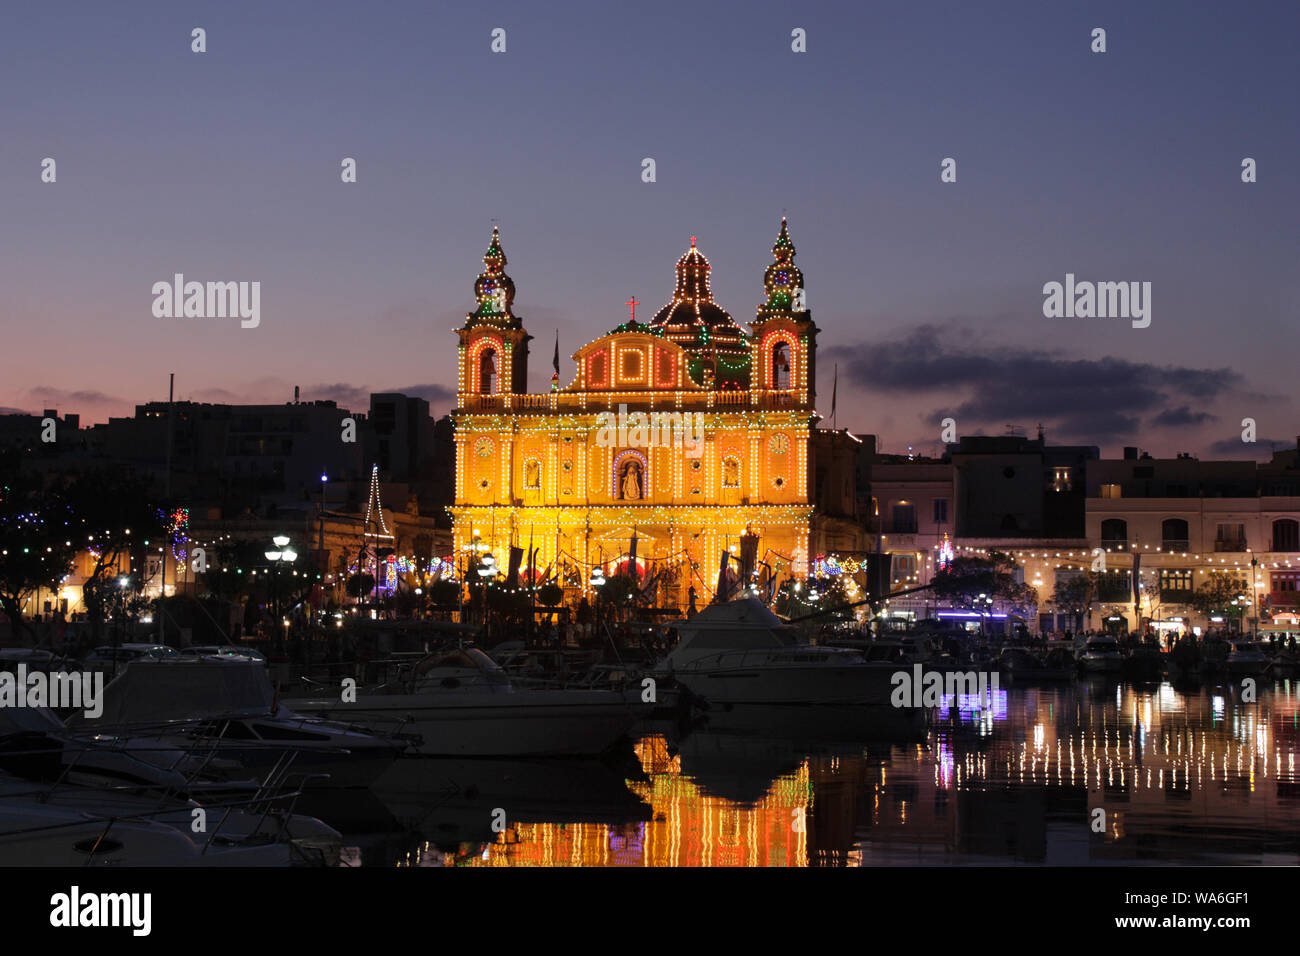 The parish church at Msida, Malta, Europe, with facade decorated with lights for the annual feast of St Joseph. Catholic religion and Christianity. Stock Photo